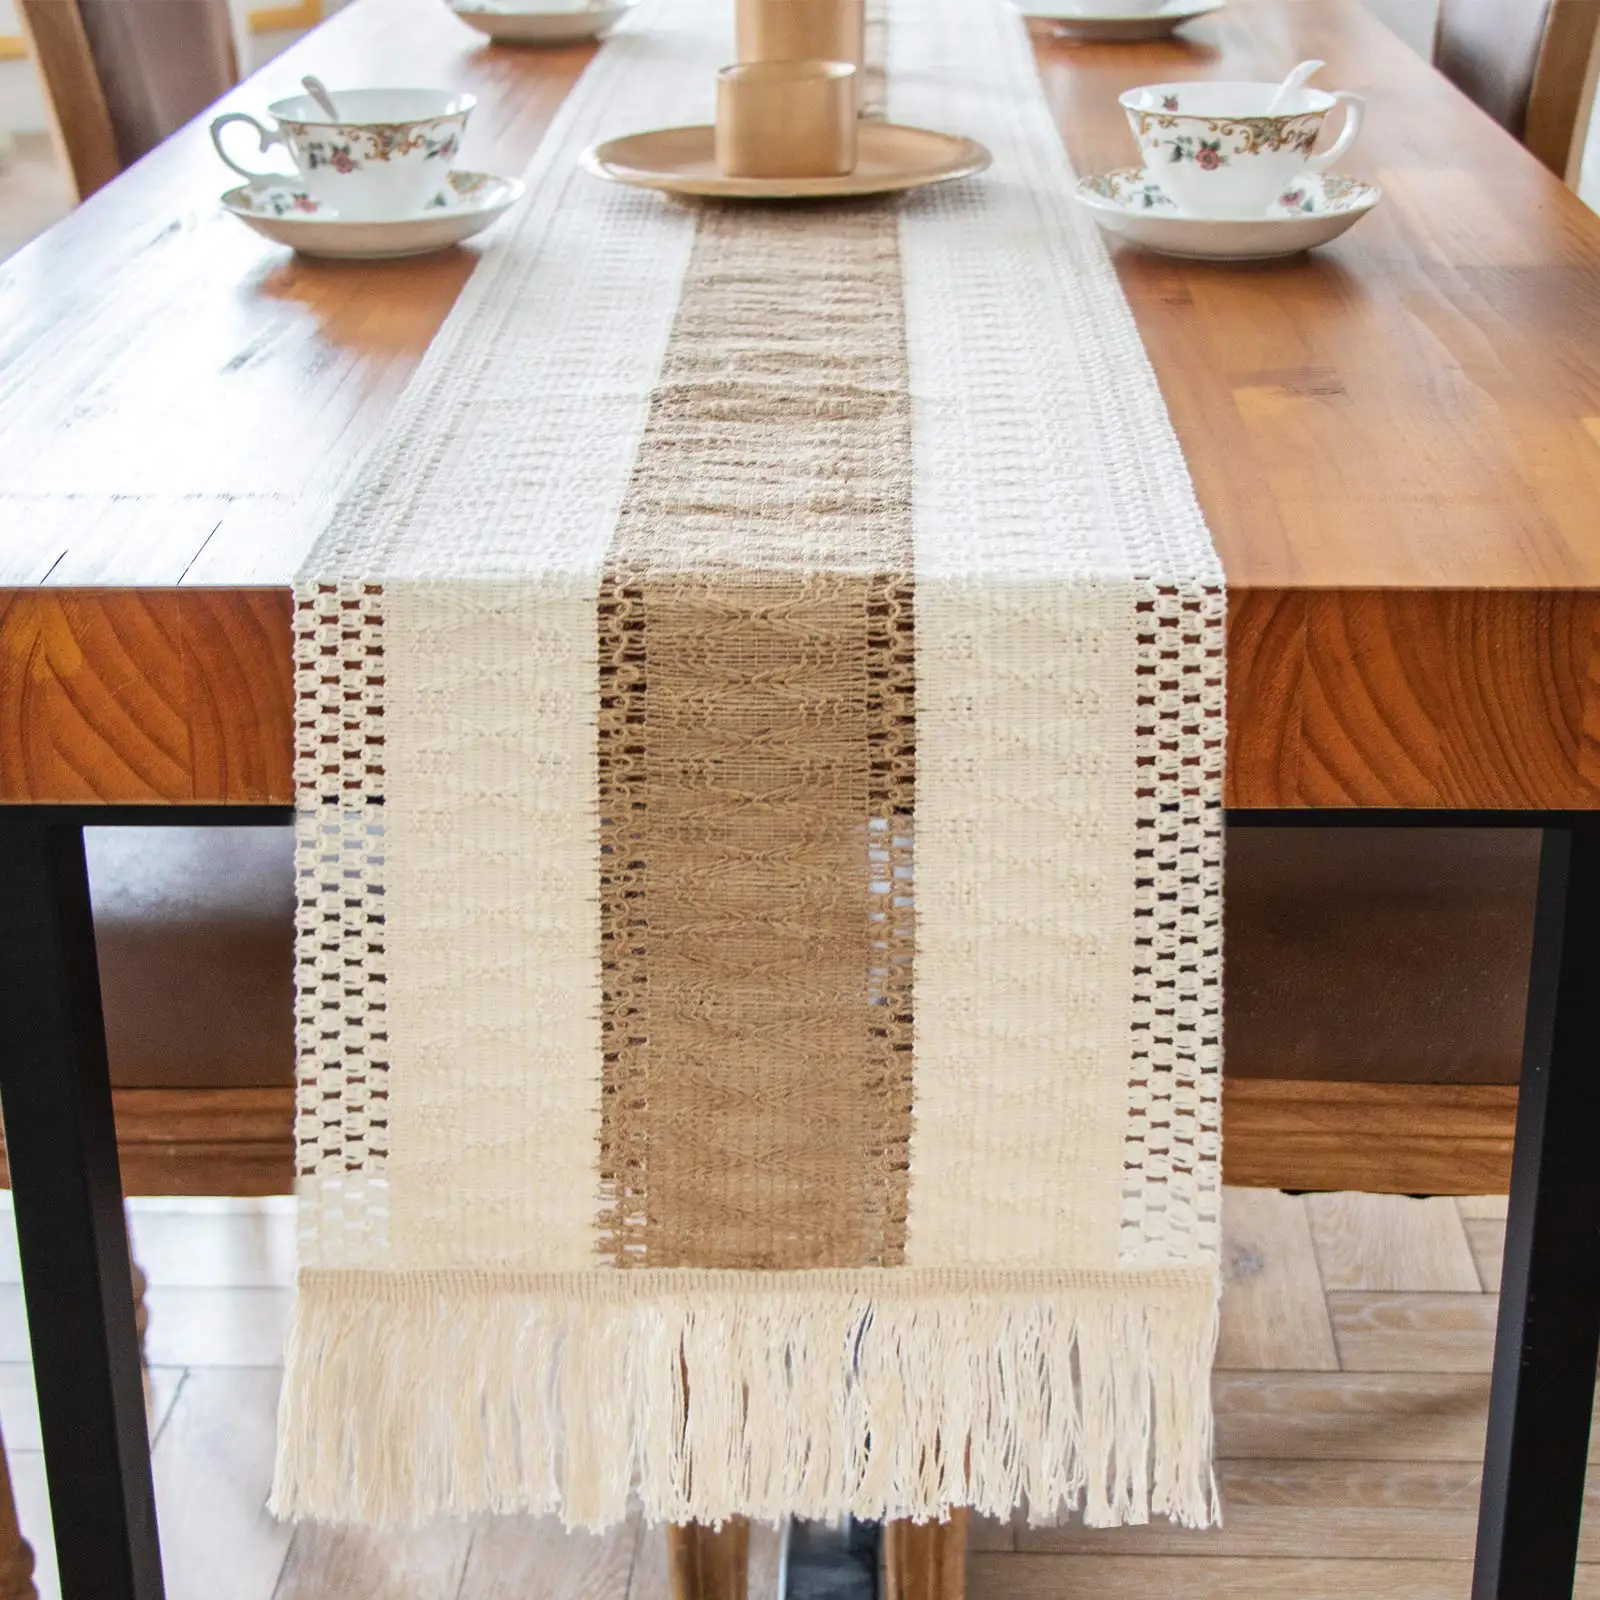 

Woven Splicing Cotton and Burlap Table Runner Farmhouse Style with Tassels Boho Wedding Bridal Shower Home Dining Table Decor